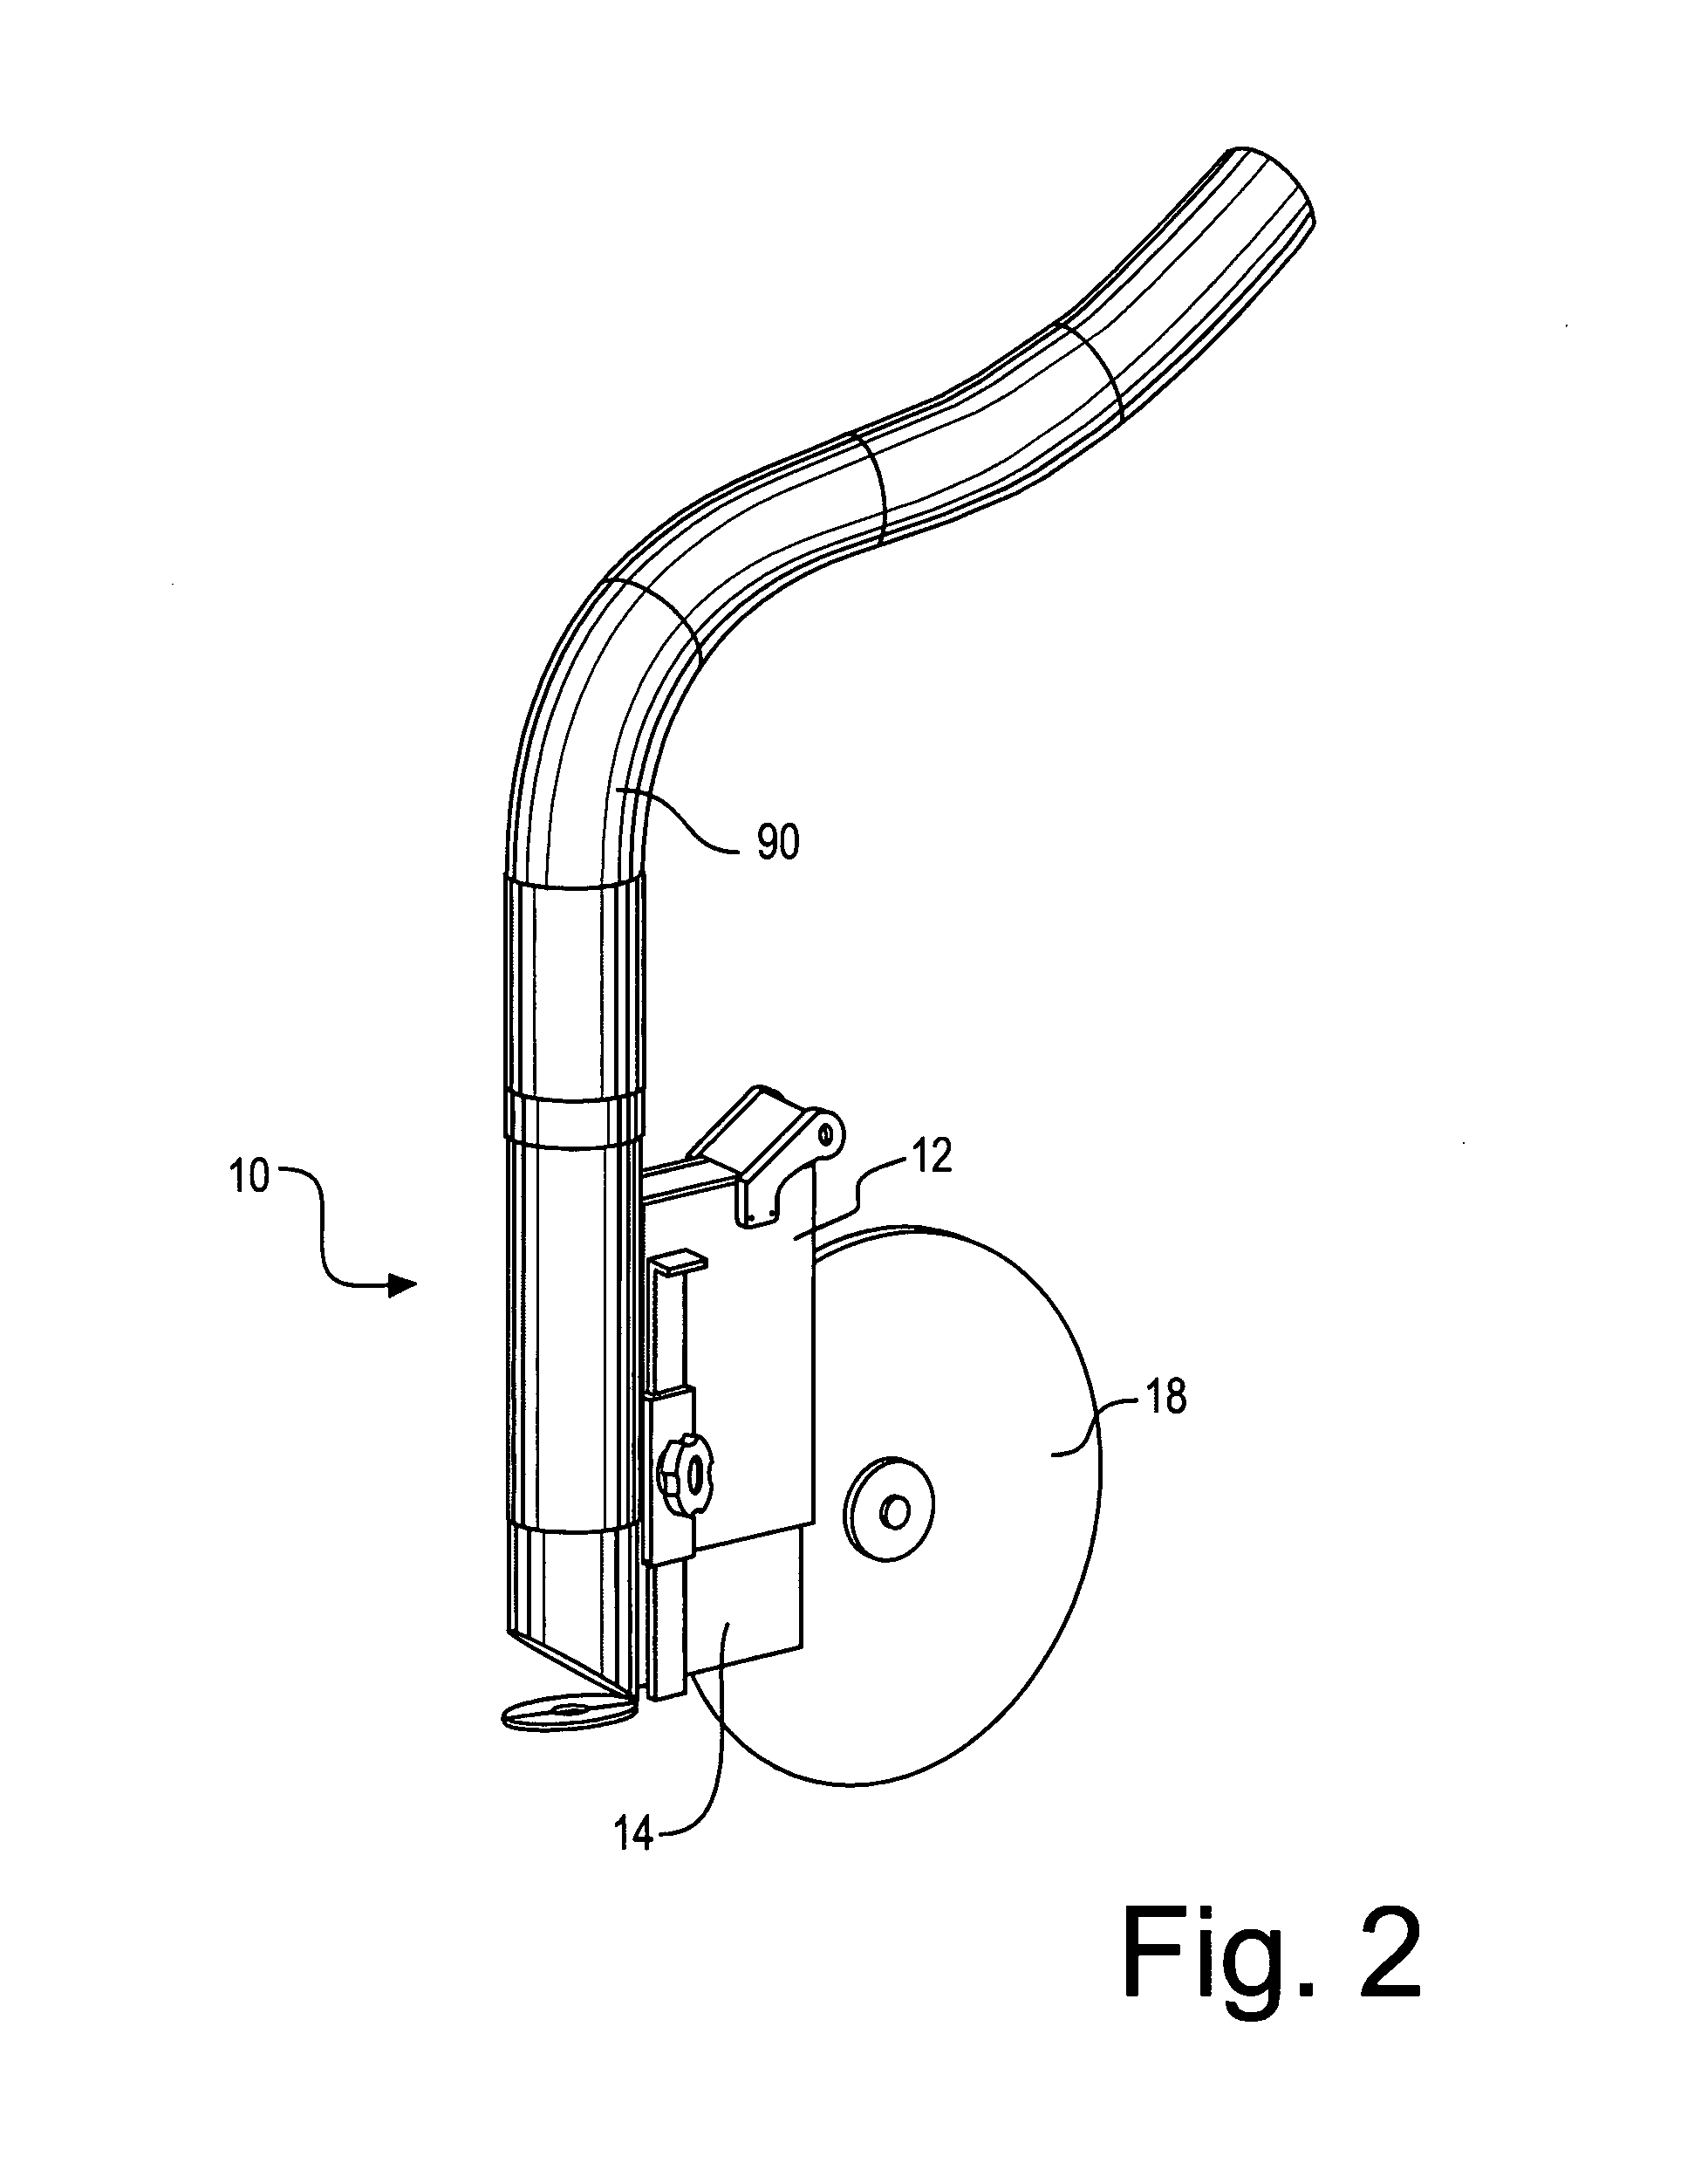 Slab saw with dust collector and method of dry-cutting pavement